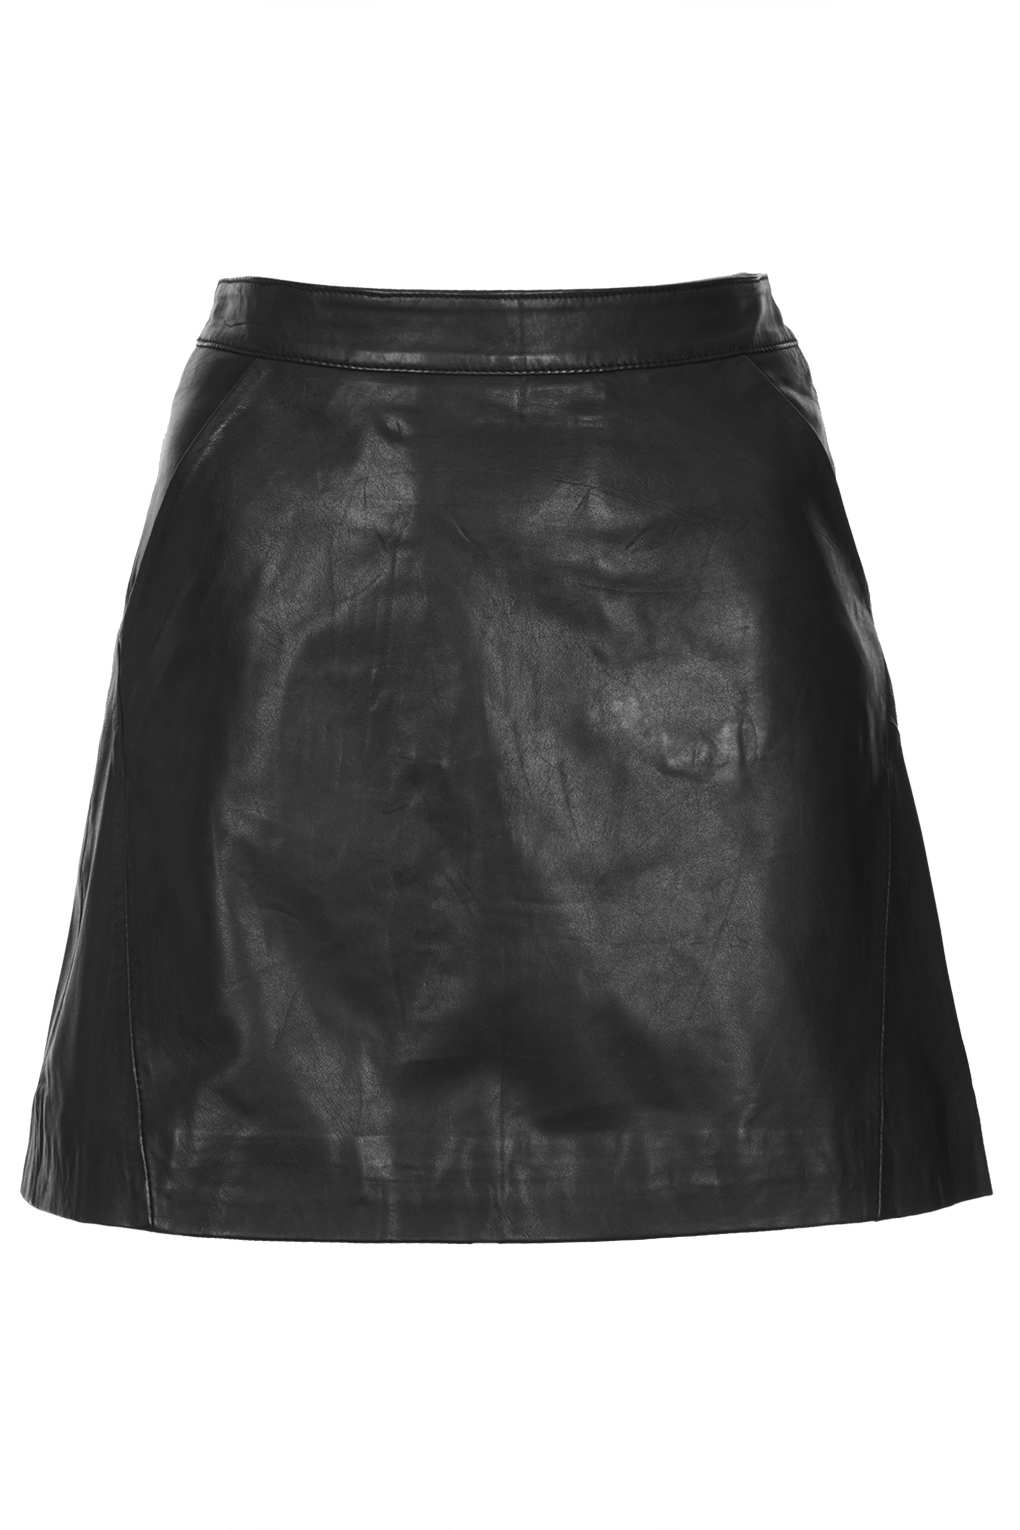 Topshop Black Leather A Line Skirt in Black | Lyst